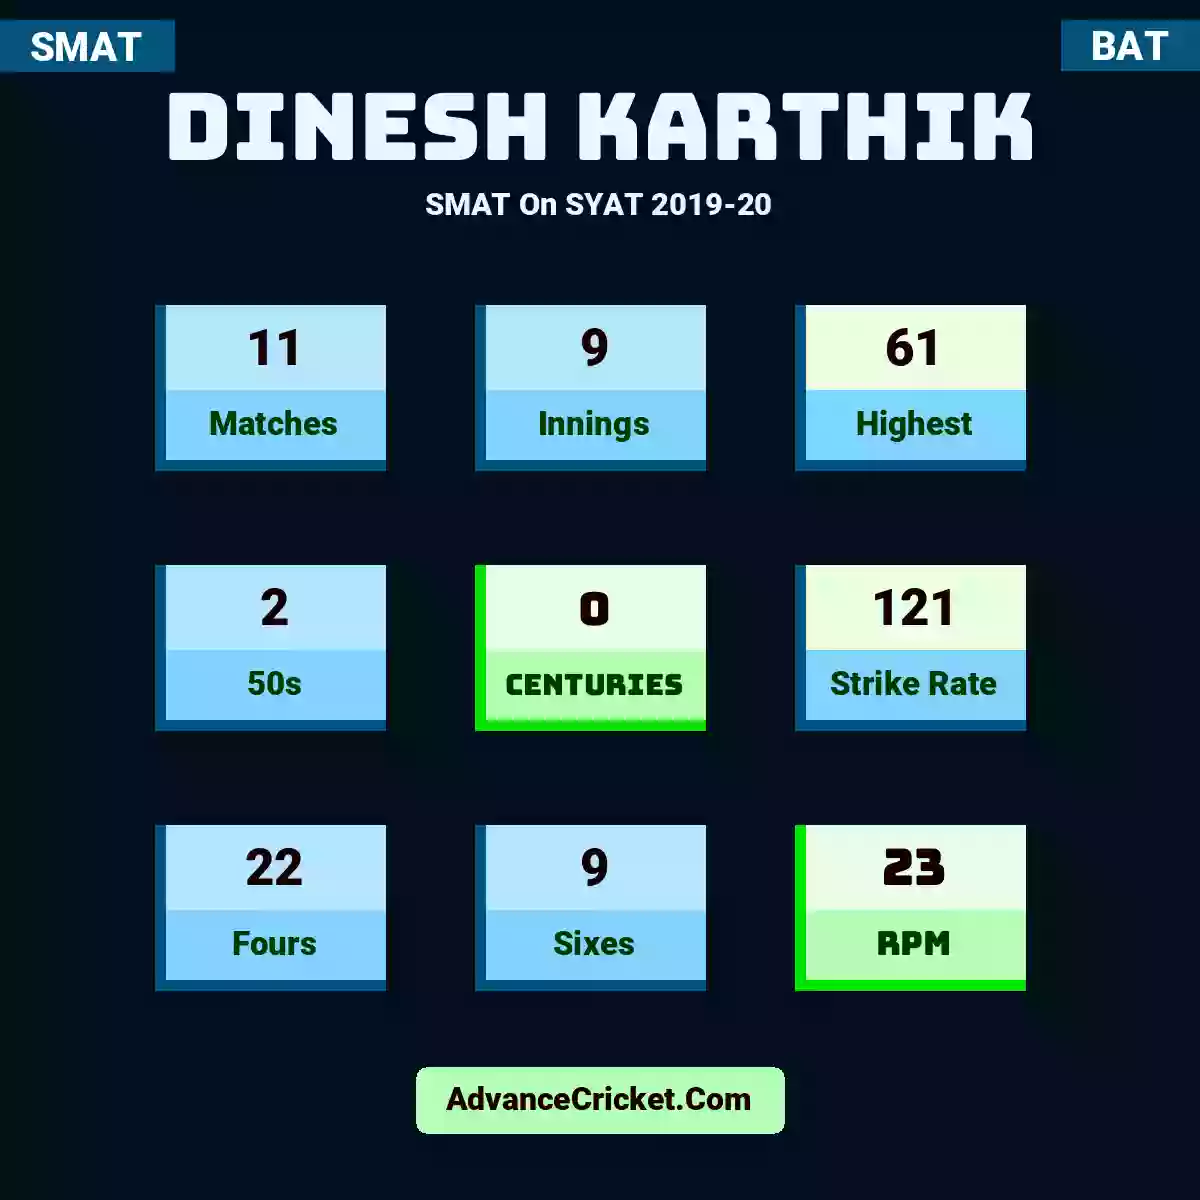 Dinesh Karthik SMAT  On SYAT 2019-20, Dinesh Karthik played 11 matches, scored 61 runs as highest, 2 half-centuries, and 0 centuries, with a strike rate of 121. D.Karthik hit 22 fours and 9 sixes, with an RPM of 23.